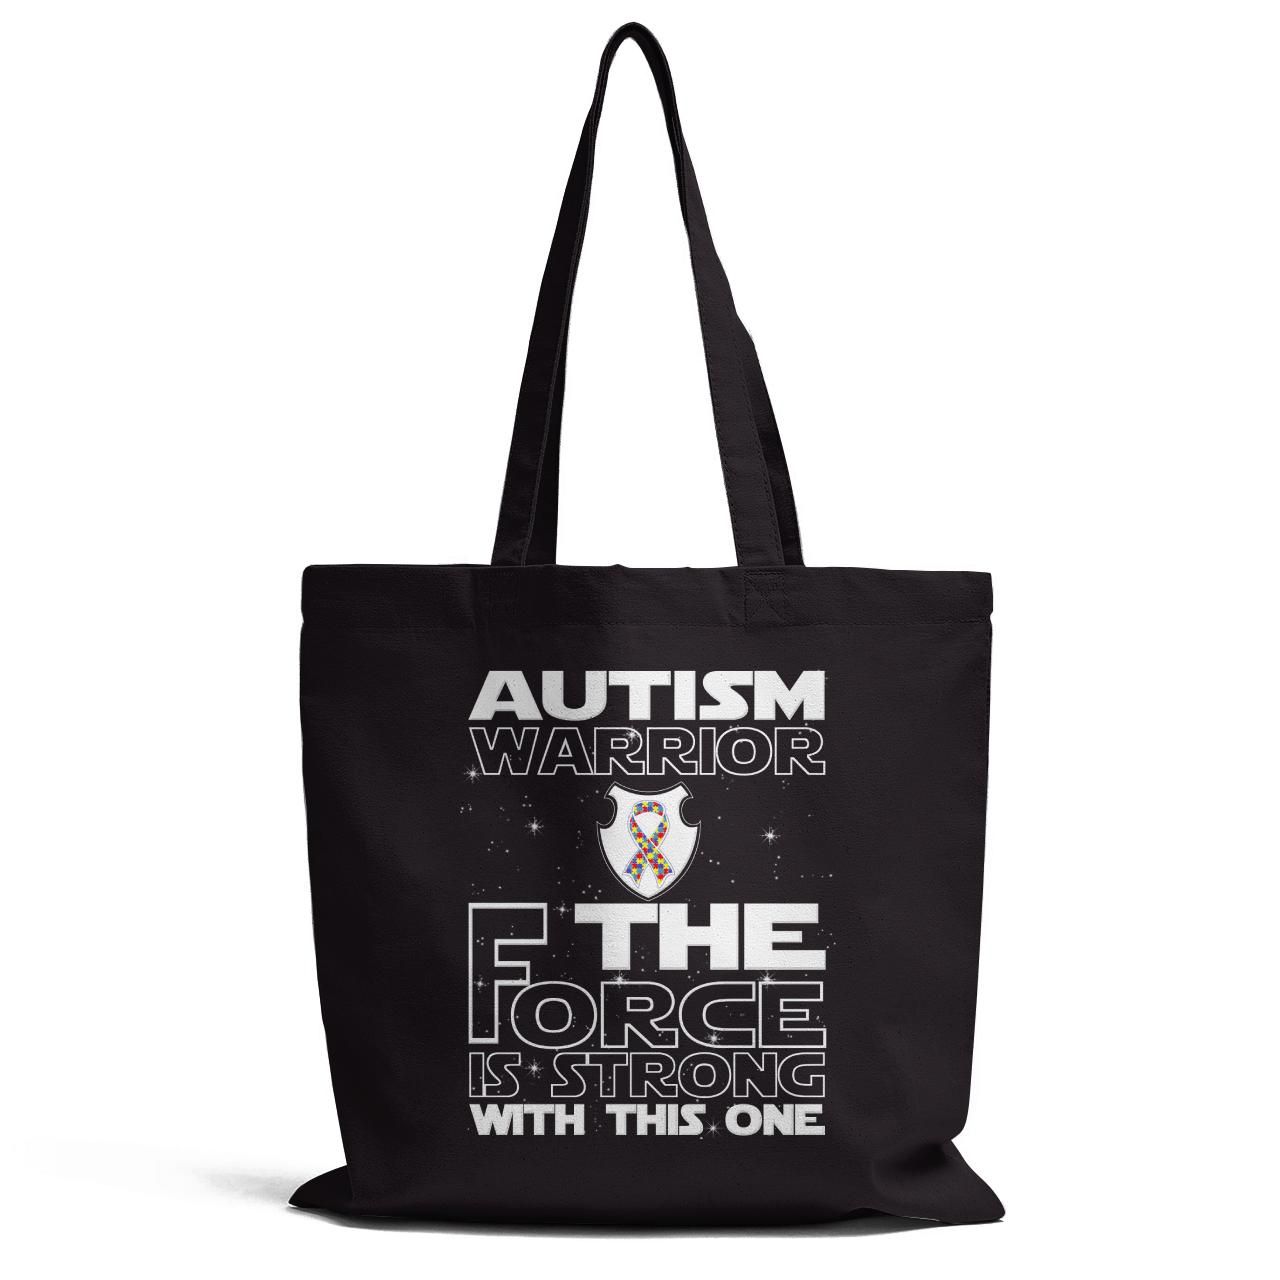 Autism Warrior The Force Is Strong With This One Tote Bag